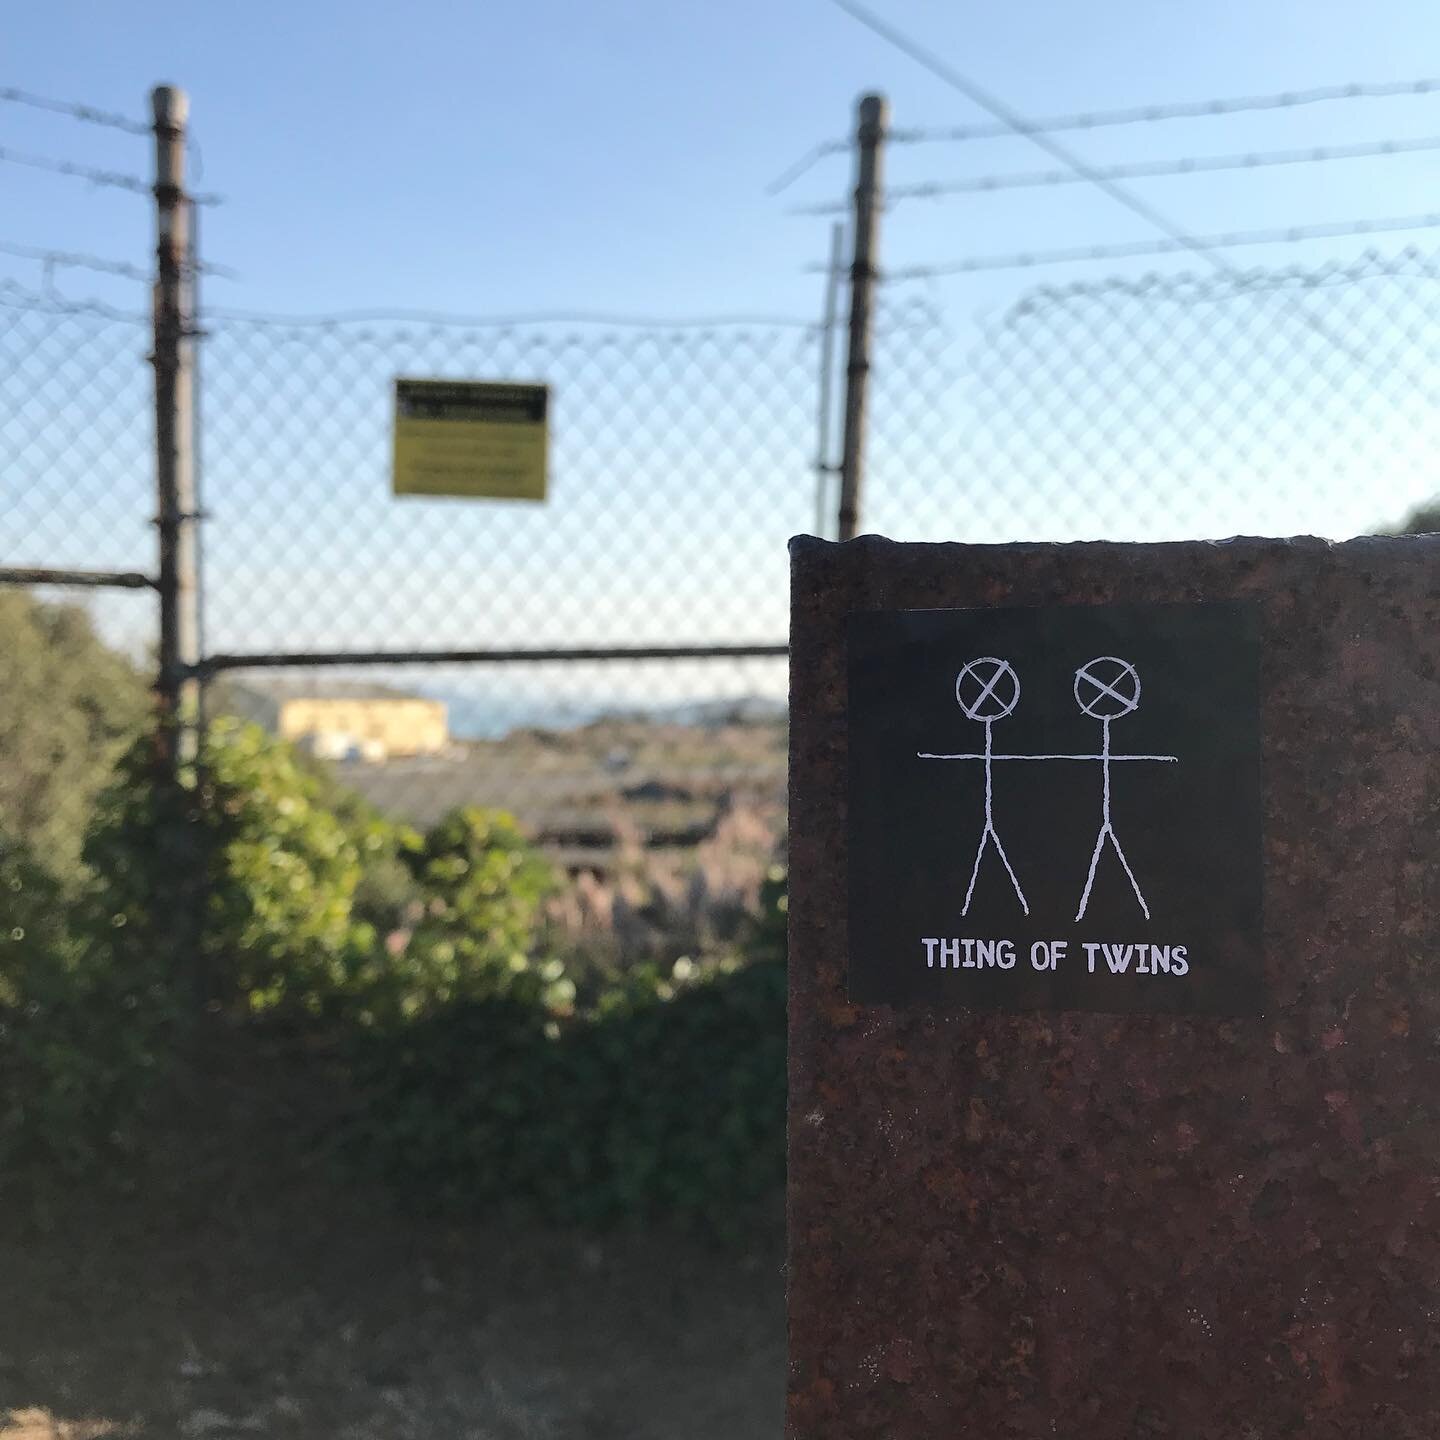 Tagging stickers all across north cal check them out 
@billiejoearmstrong 
#thingoftwins #independentlabels #rock #band #alternative #music #duo #twins #twopiecesband #upcomingartist #upcomingband #upcomingmusic #album #2020 #stickers #losangelesband